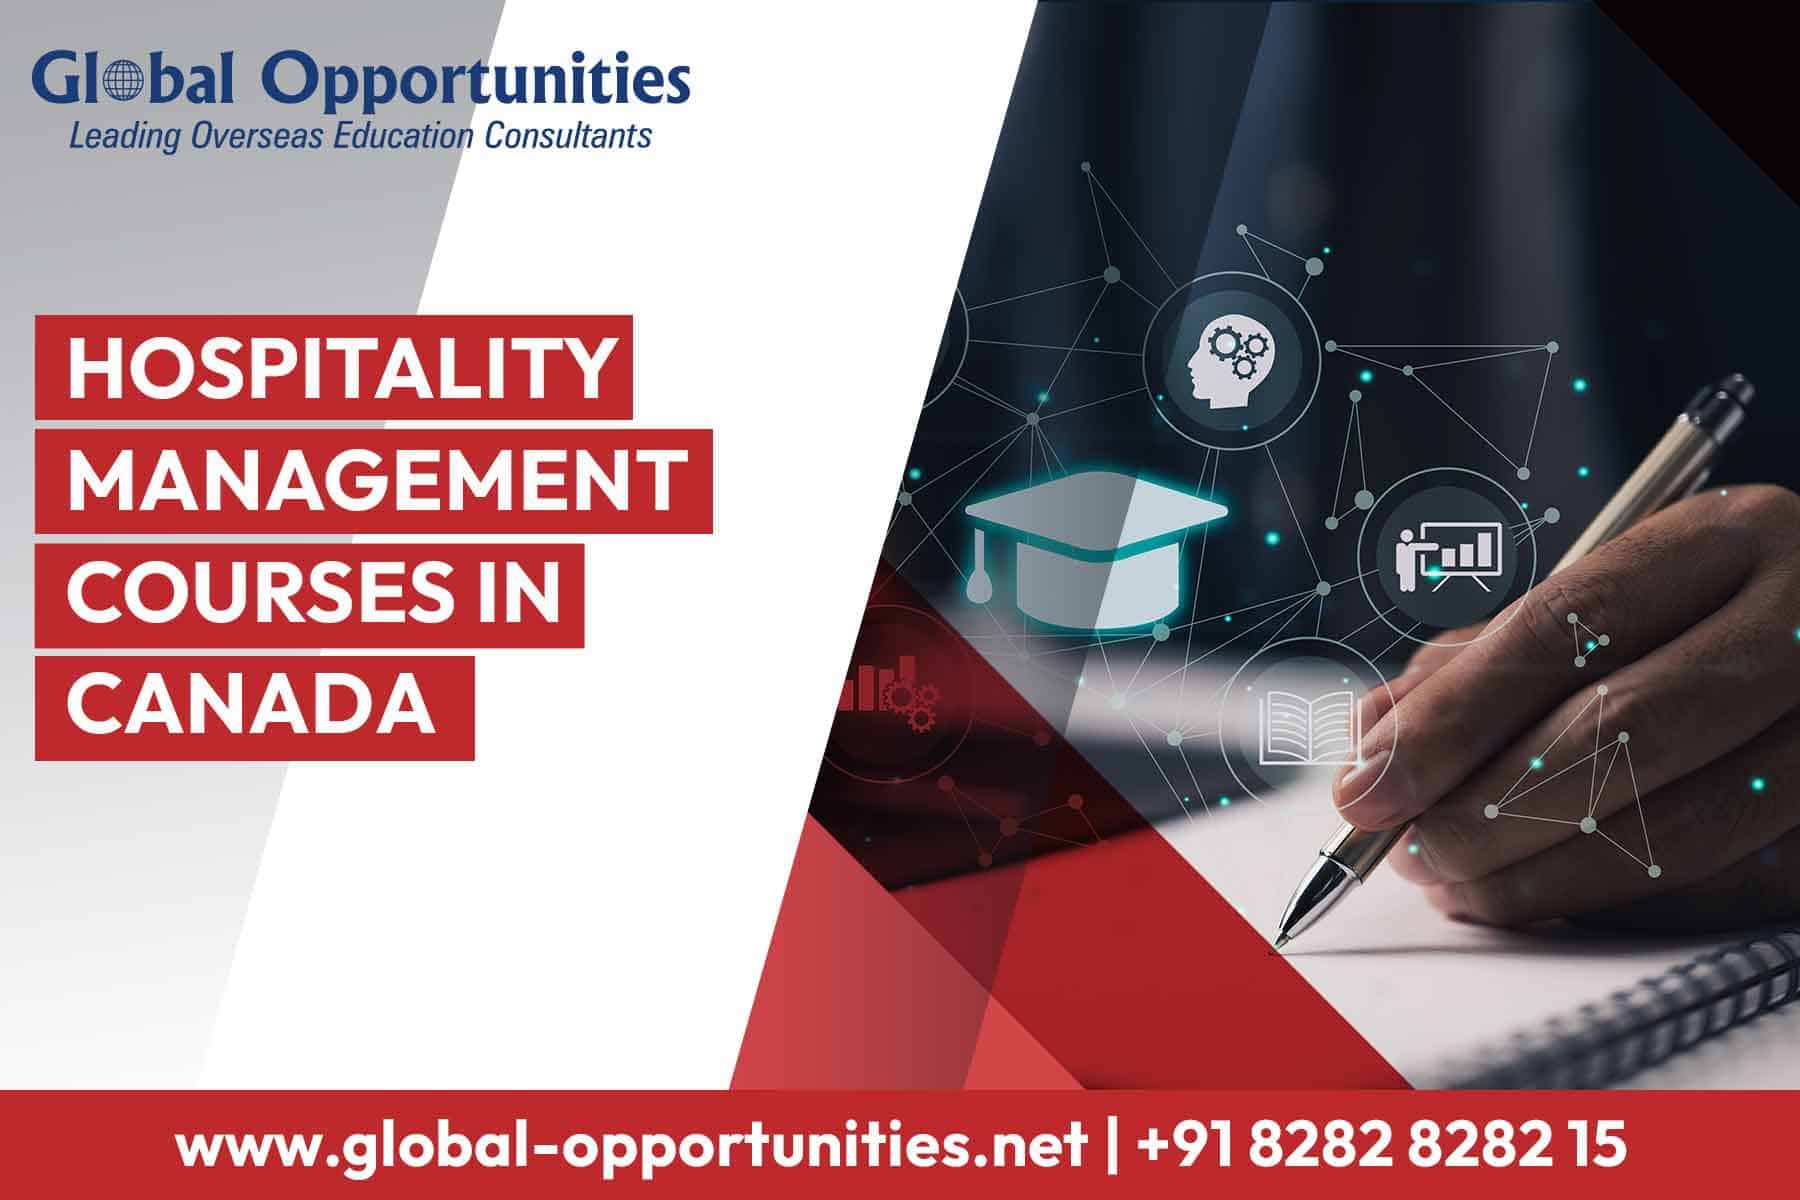 Hospitality Management Courses in Canada